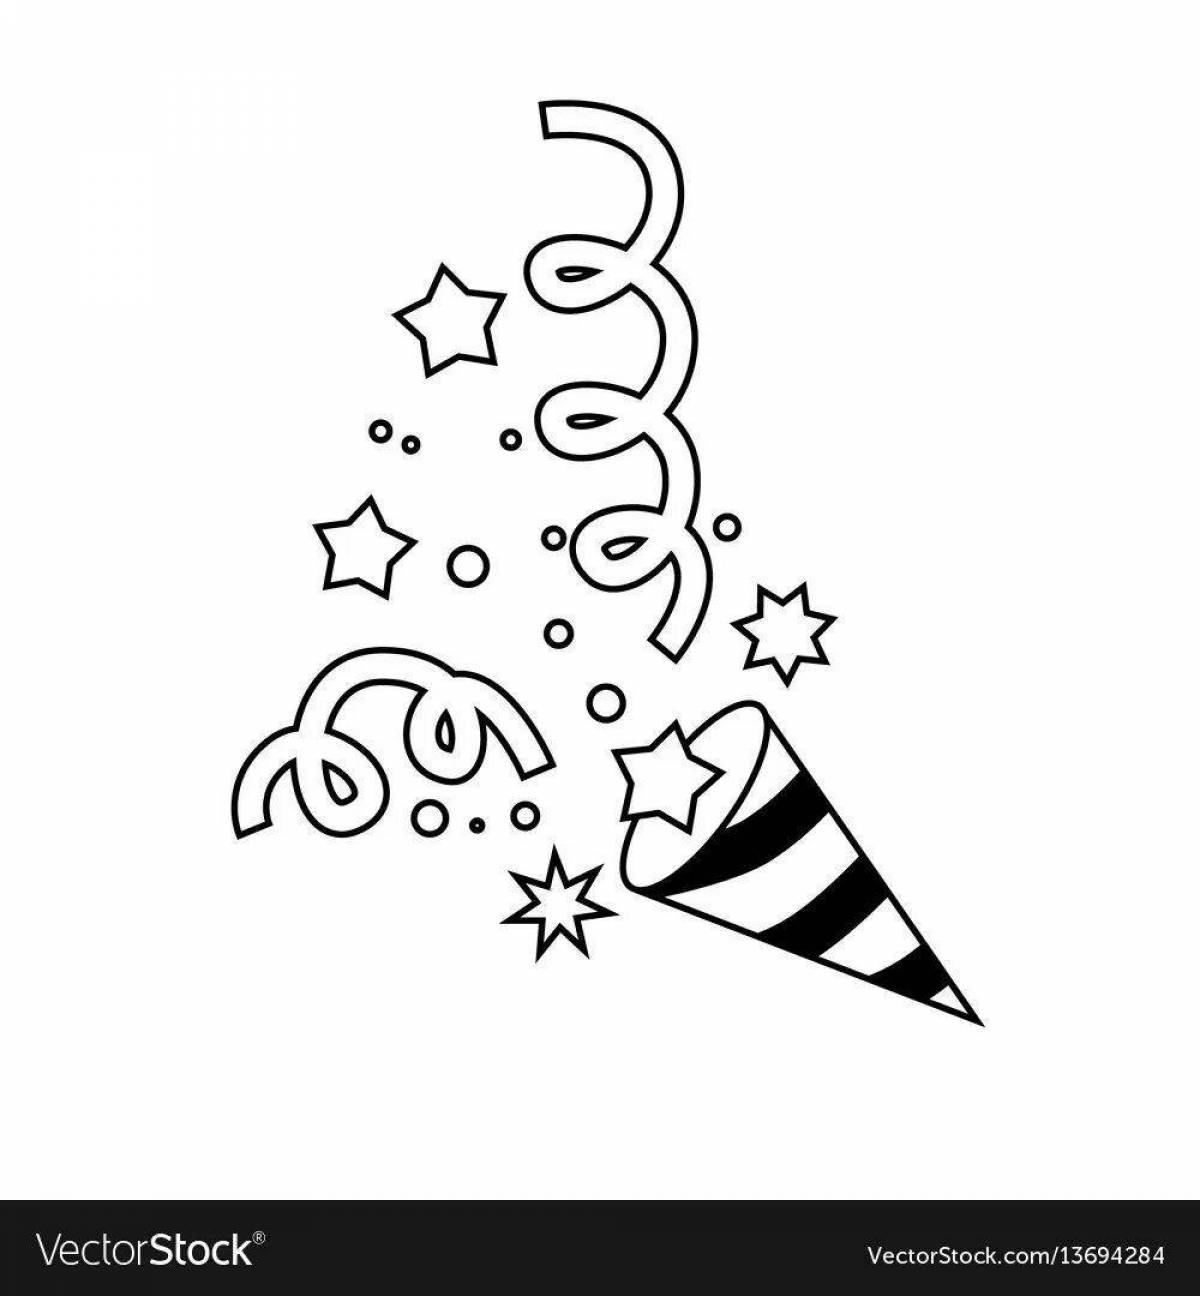 Fabulous Christmas cracker coloring page